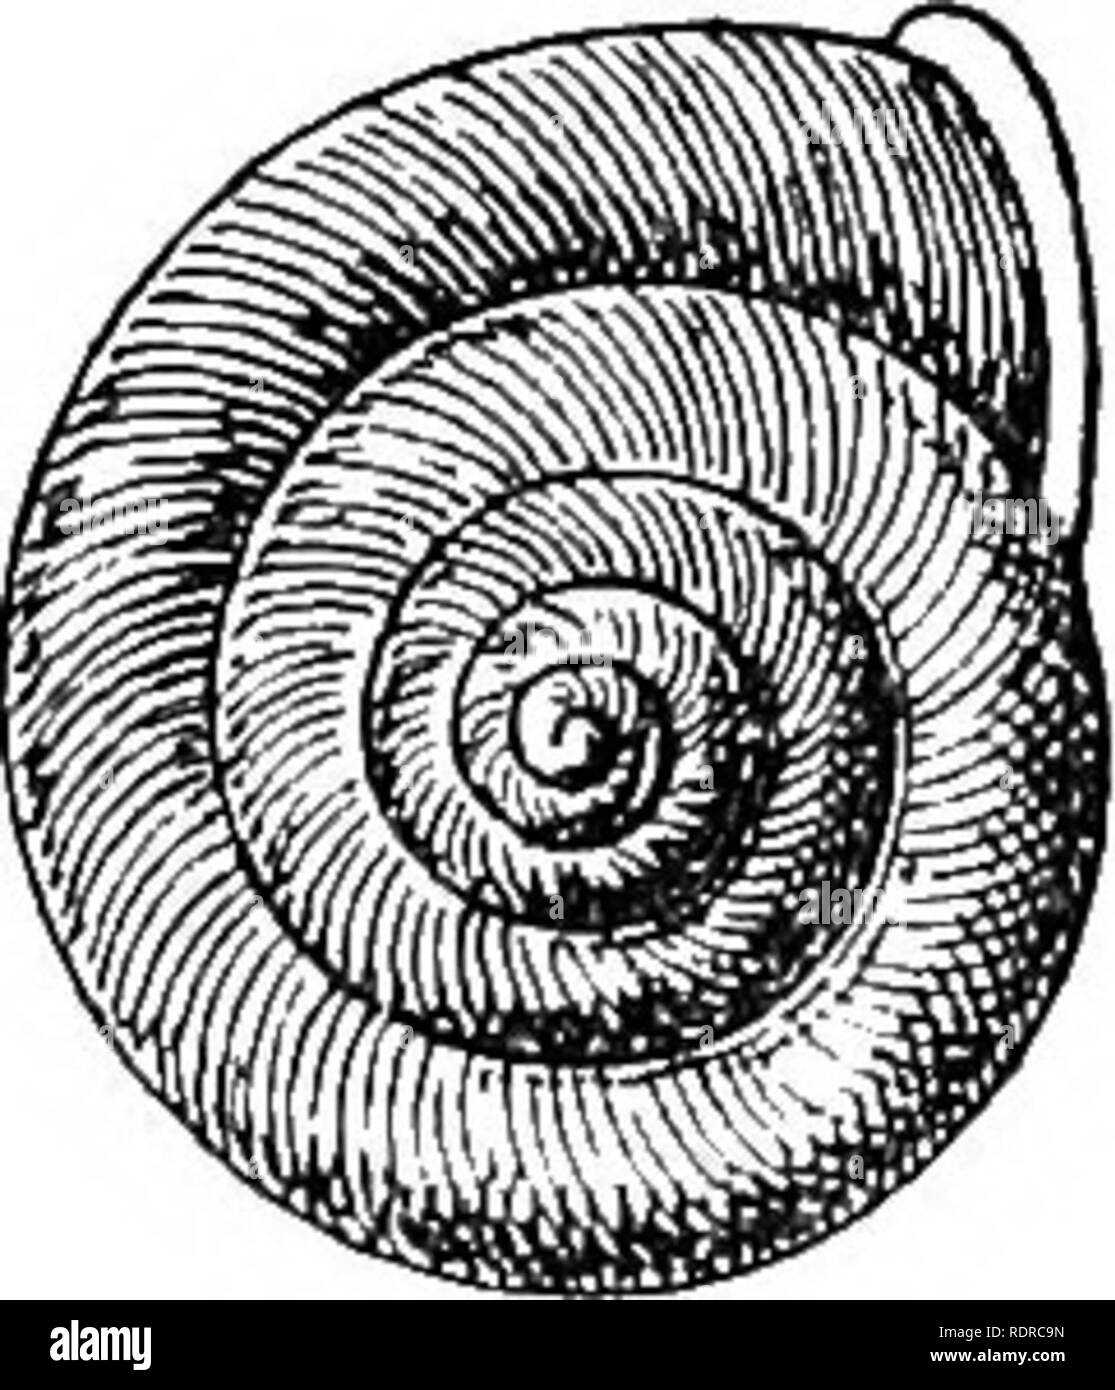 . Mollusca ... Mollusks. Kg. 81.—Chloritis theoialdi. fProm Proo. Malac. Soc. London.) A specimen in the Hungerford collection of the British Museum I also refer to C. theobaldi. It is a trifle smaller than the type, measuring 24 : 20 : 15 mm., and exhibits a very faint trace only of the supra-peripheral band near the peristome. The two species approach G. franciseanorum, Gredler, a Chinese form. 0. theobaldi especially bears a striking resemblance, but has the umbilicus a little more contracted, the spire is relatively higher, and the aperture is less dilated laterally, while the columellar m Stock Photo